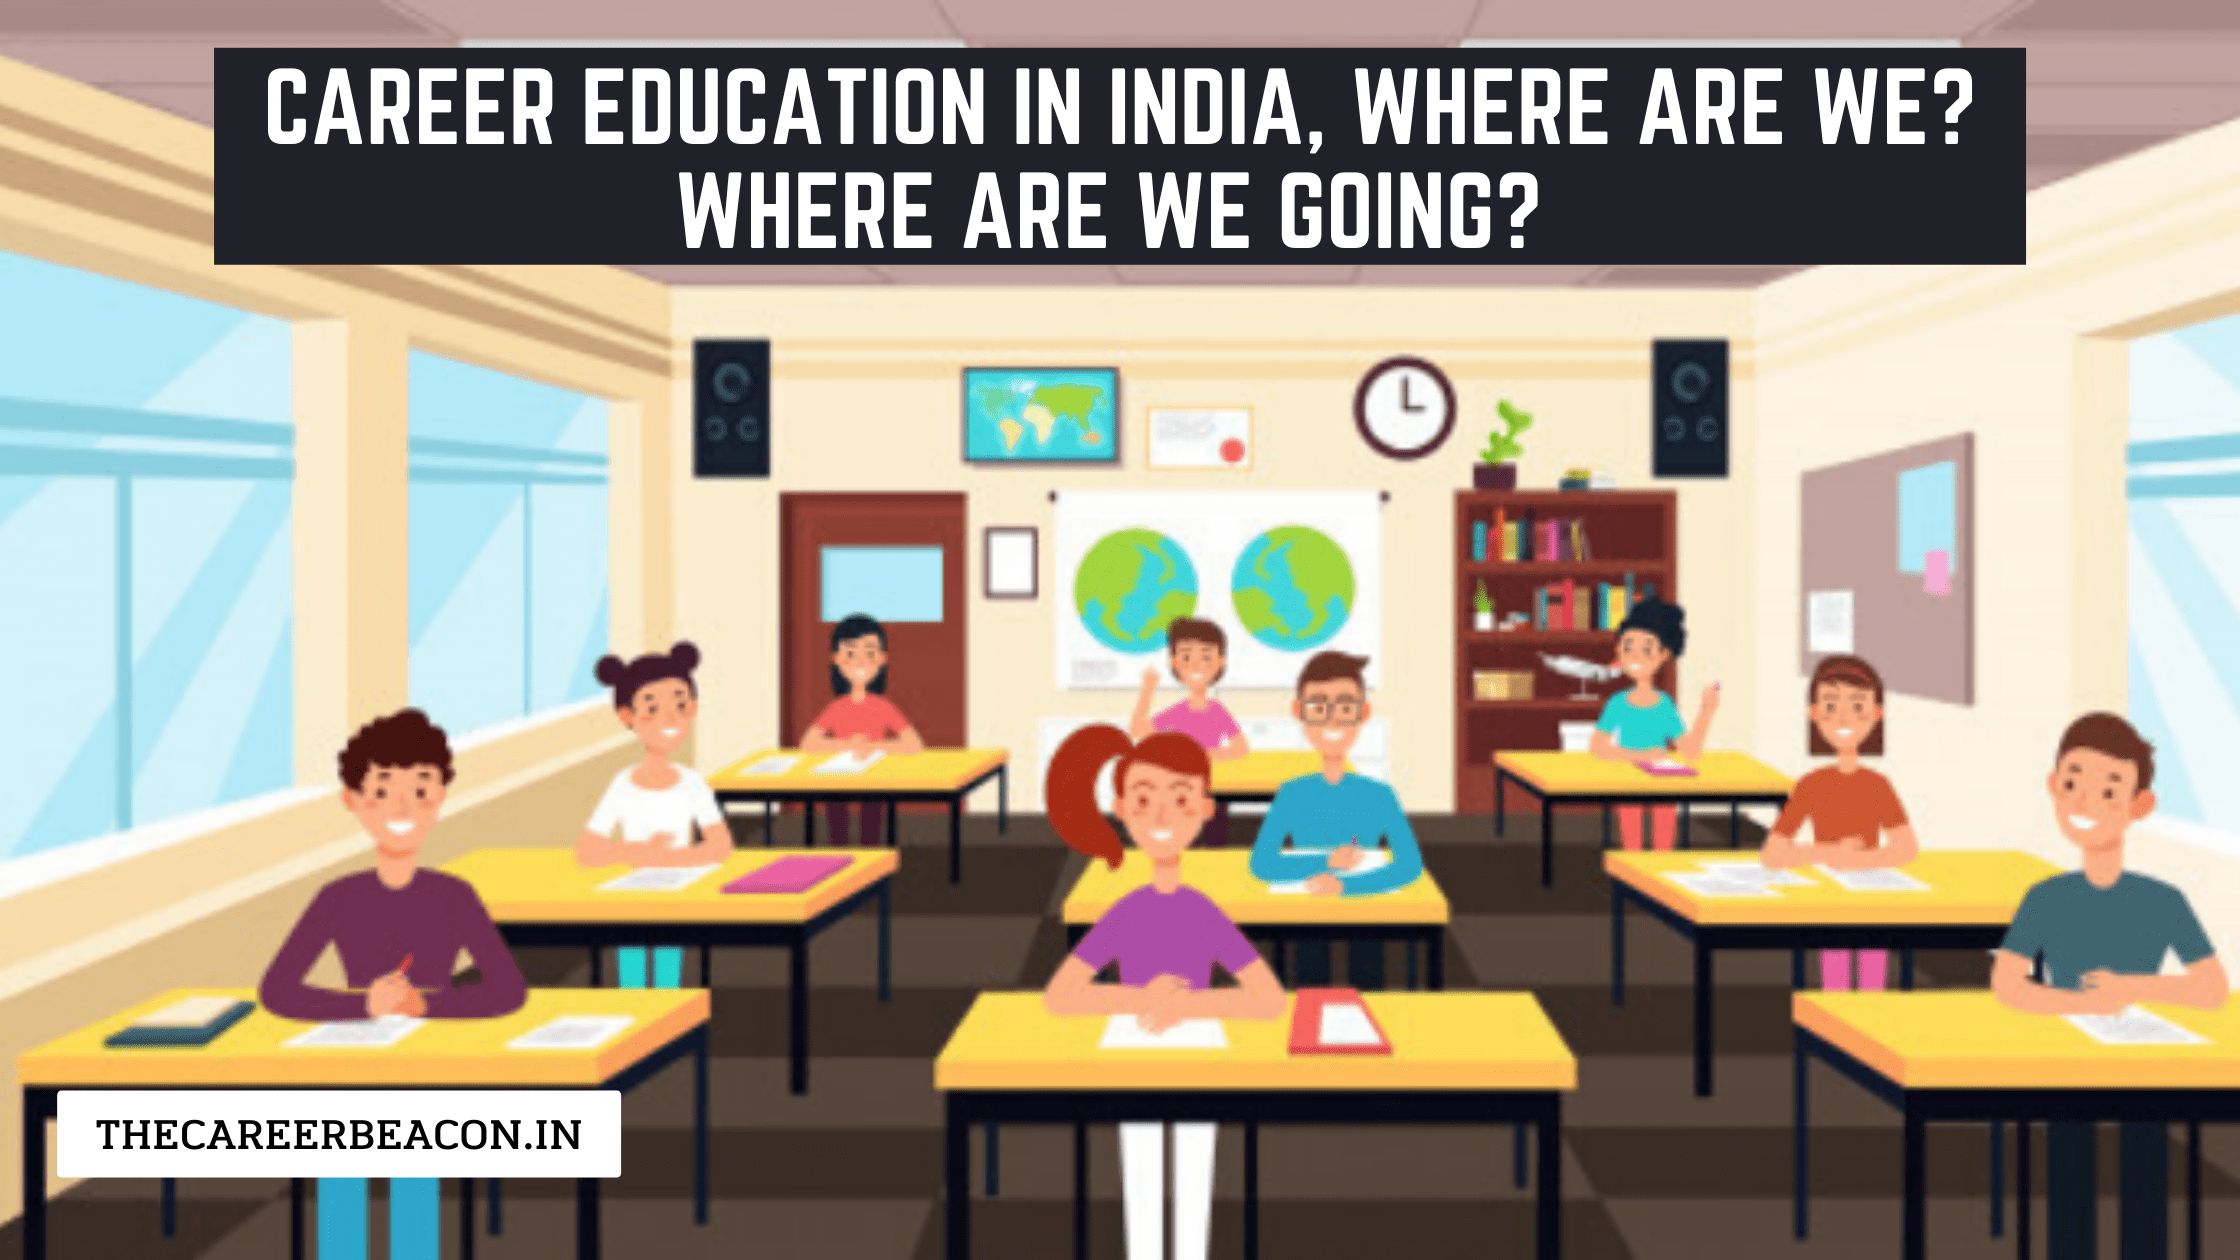 Career Education in India, Where Are We? Where Are We Going?